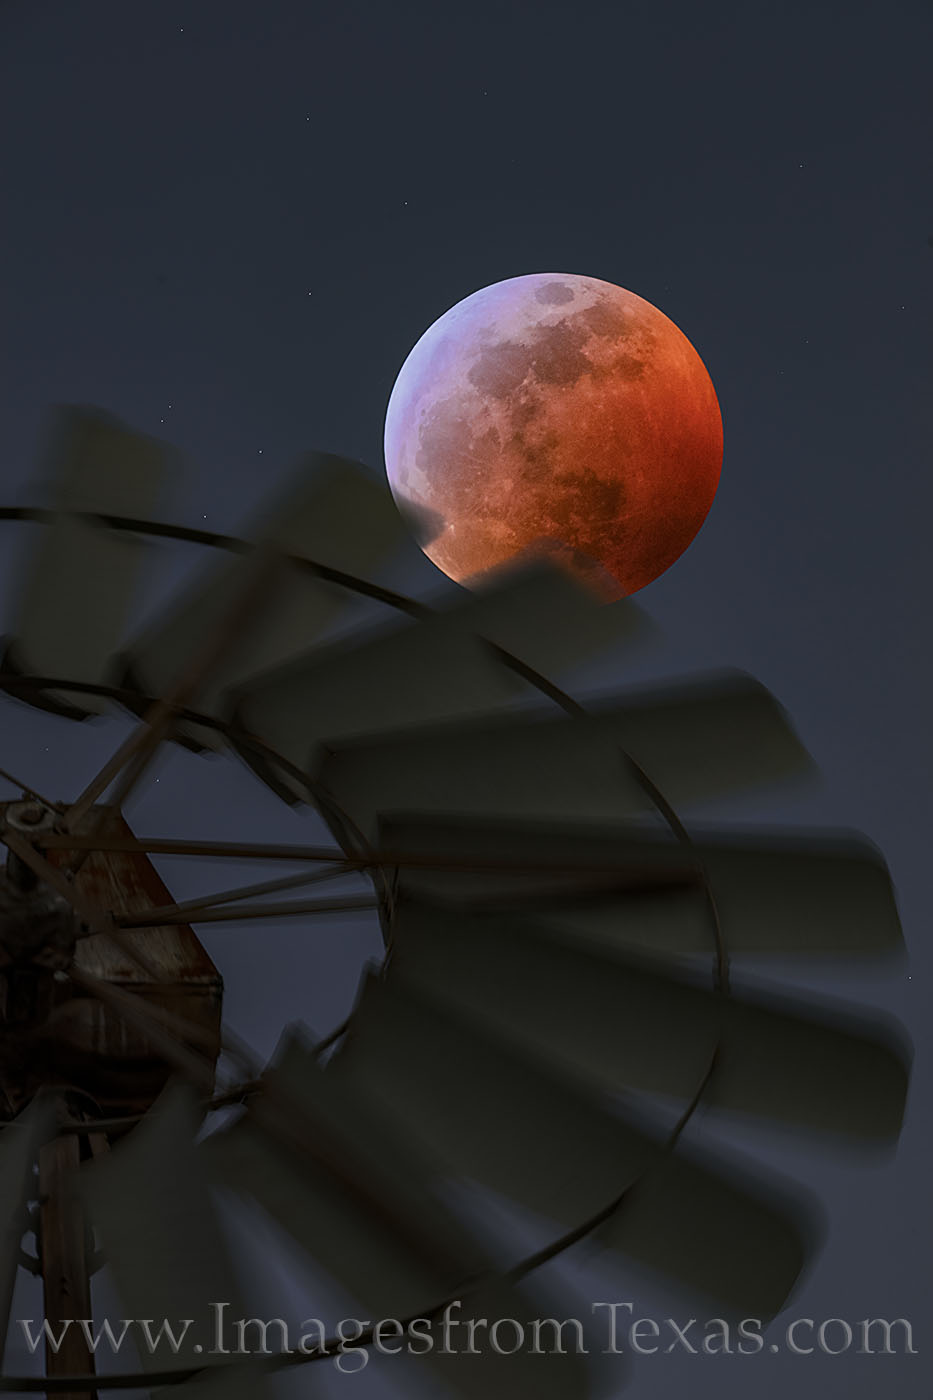 super moon, blood moon, wolf moon, lunar eclipse, texas hill country windmill, night, hill country, total lunar eclipse, red moon, orange moon, full moon